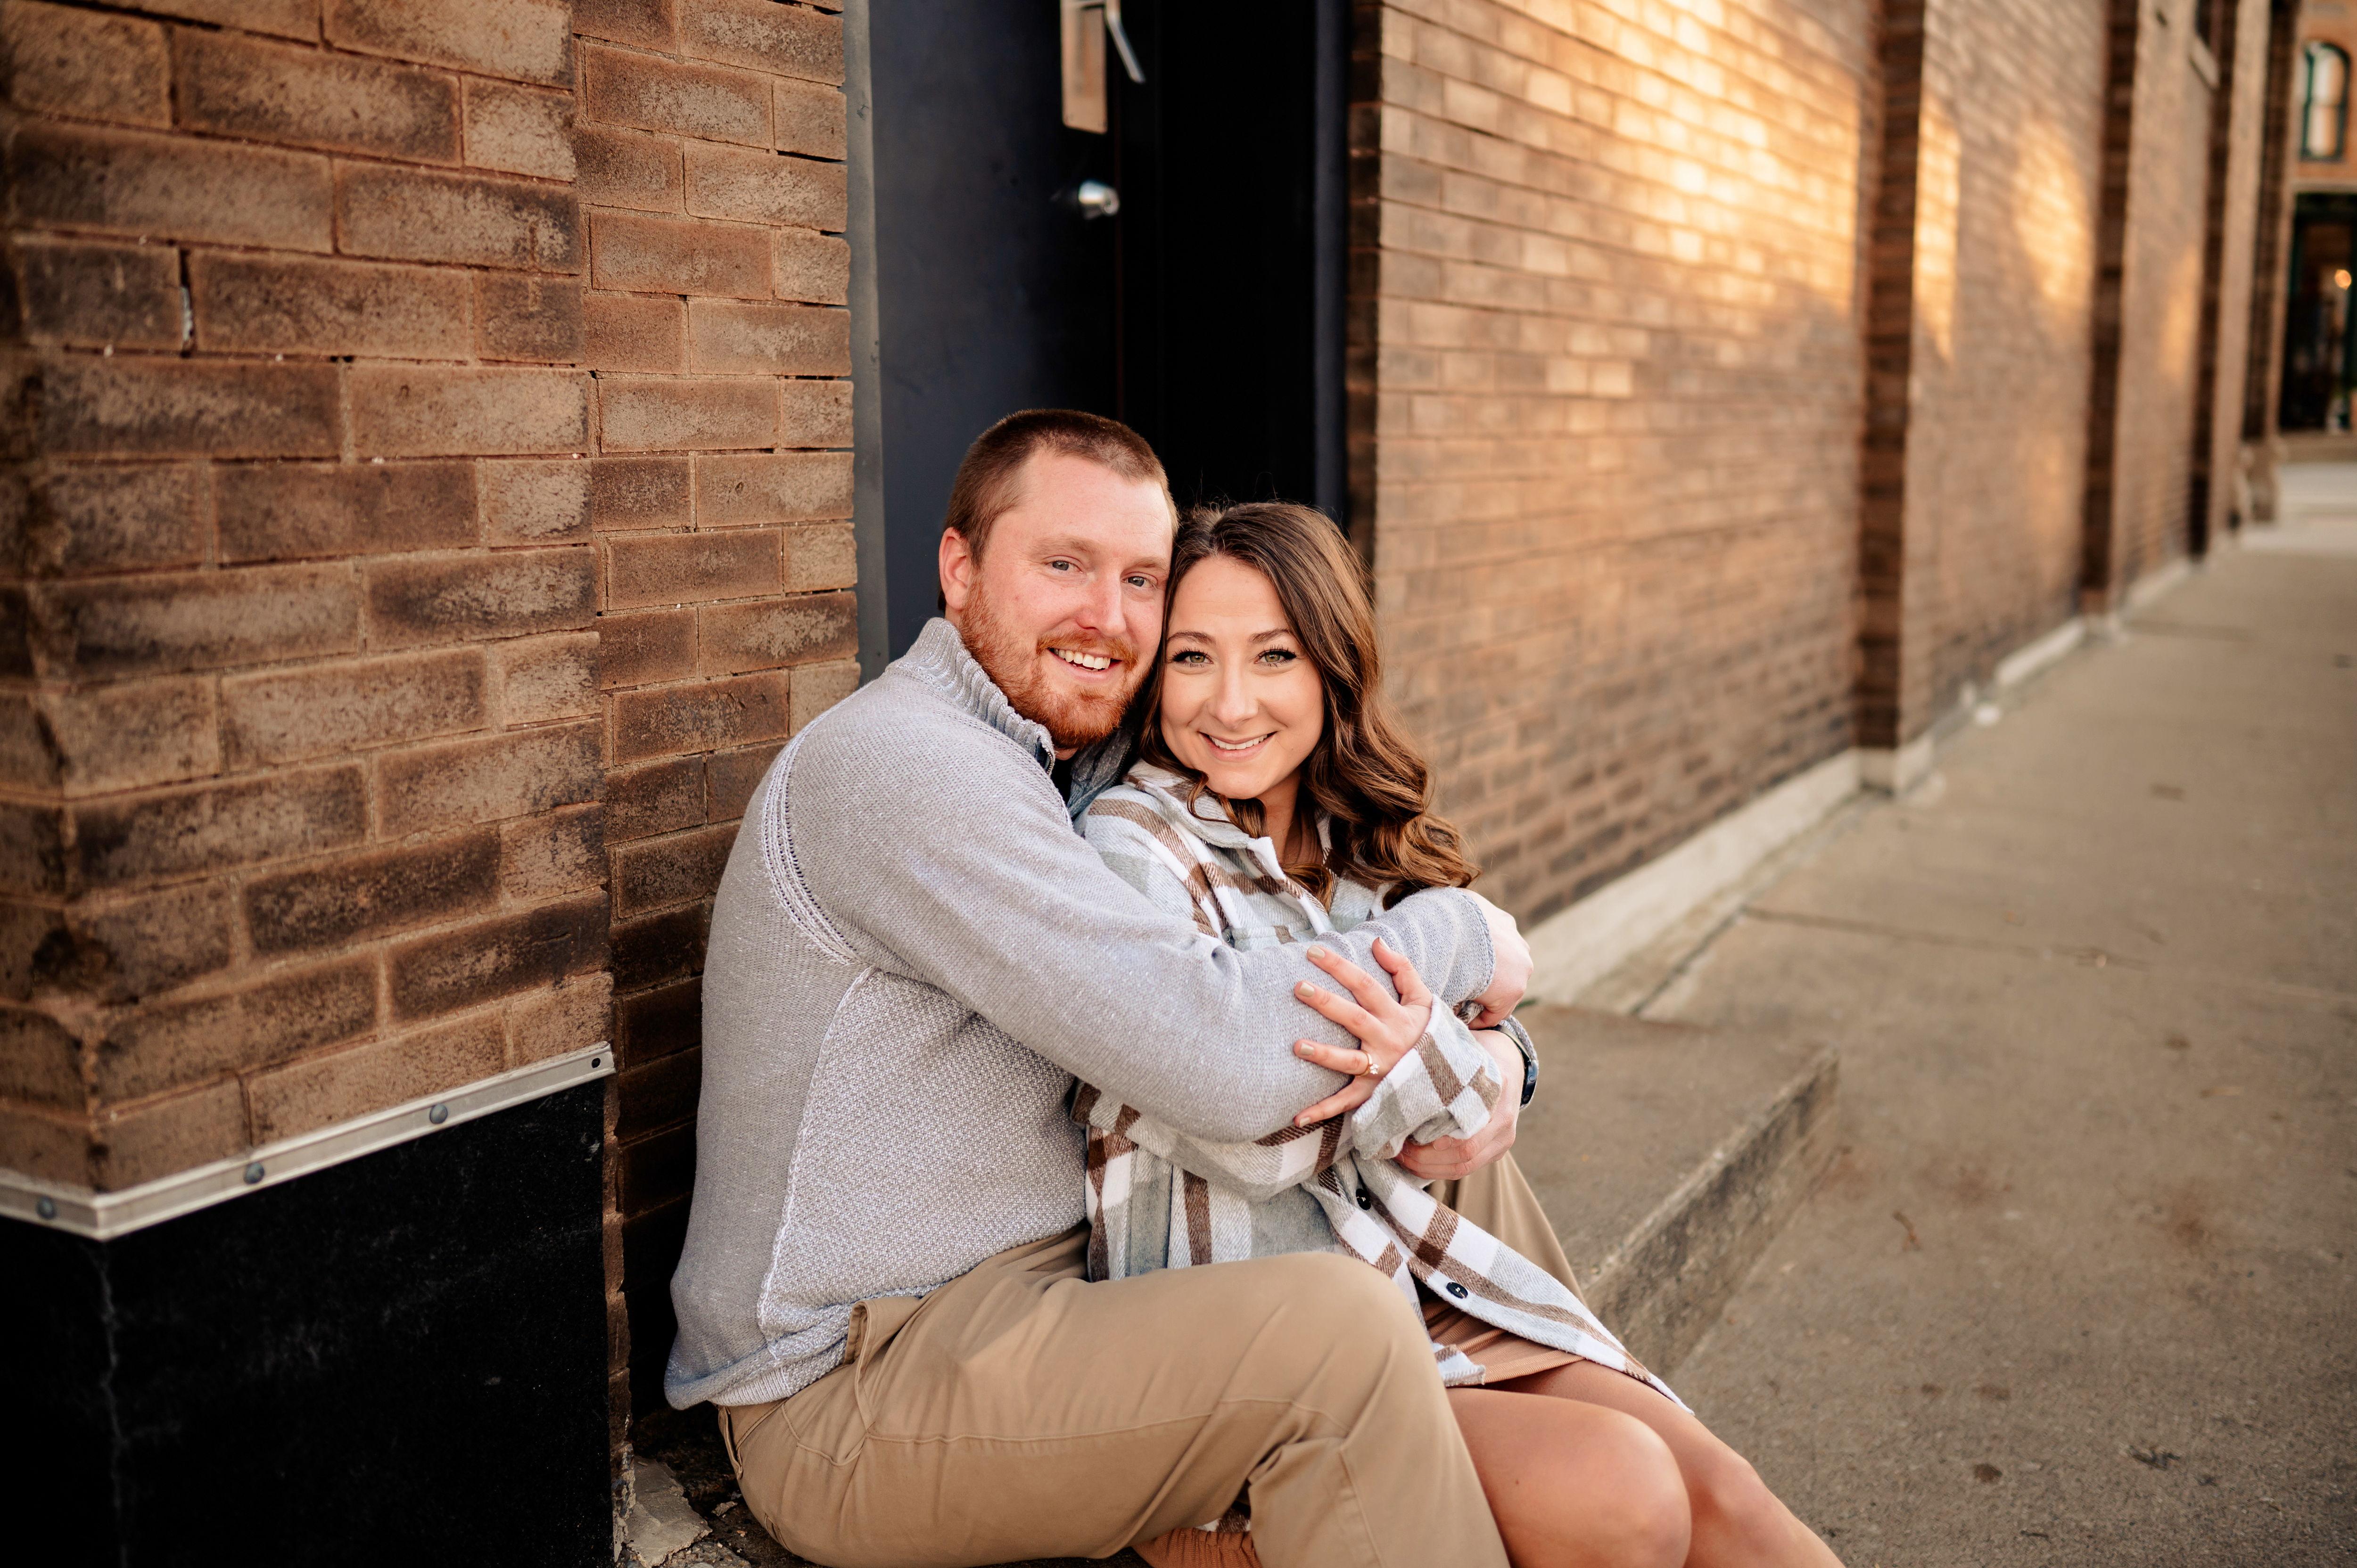 The Wedding Website of Jordie Miller and Nathan Burchell